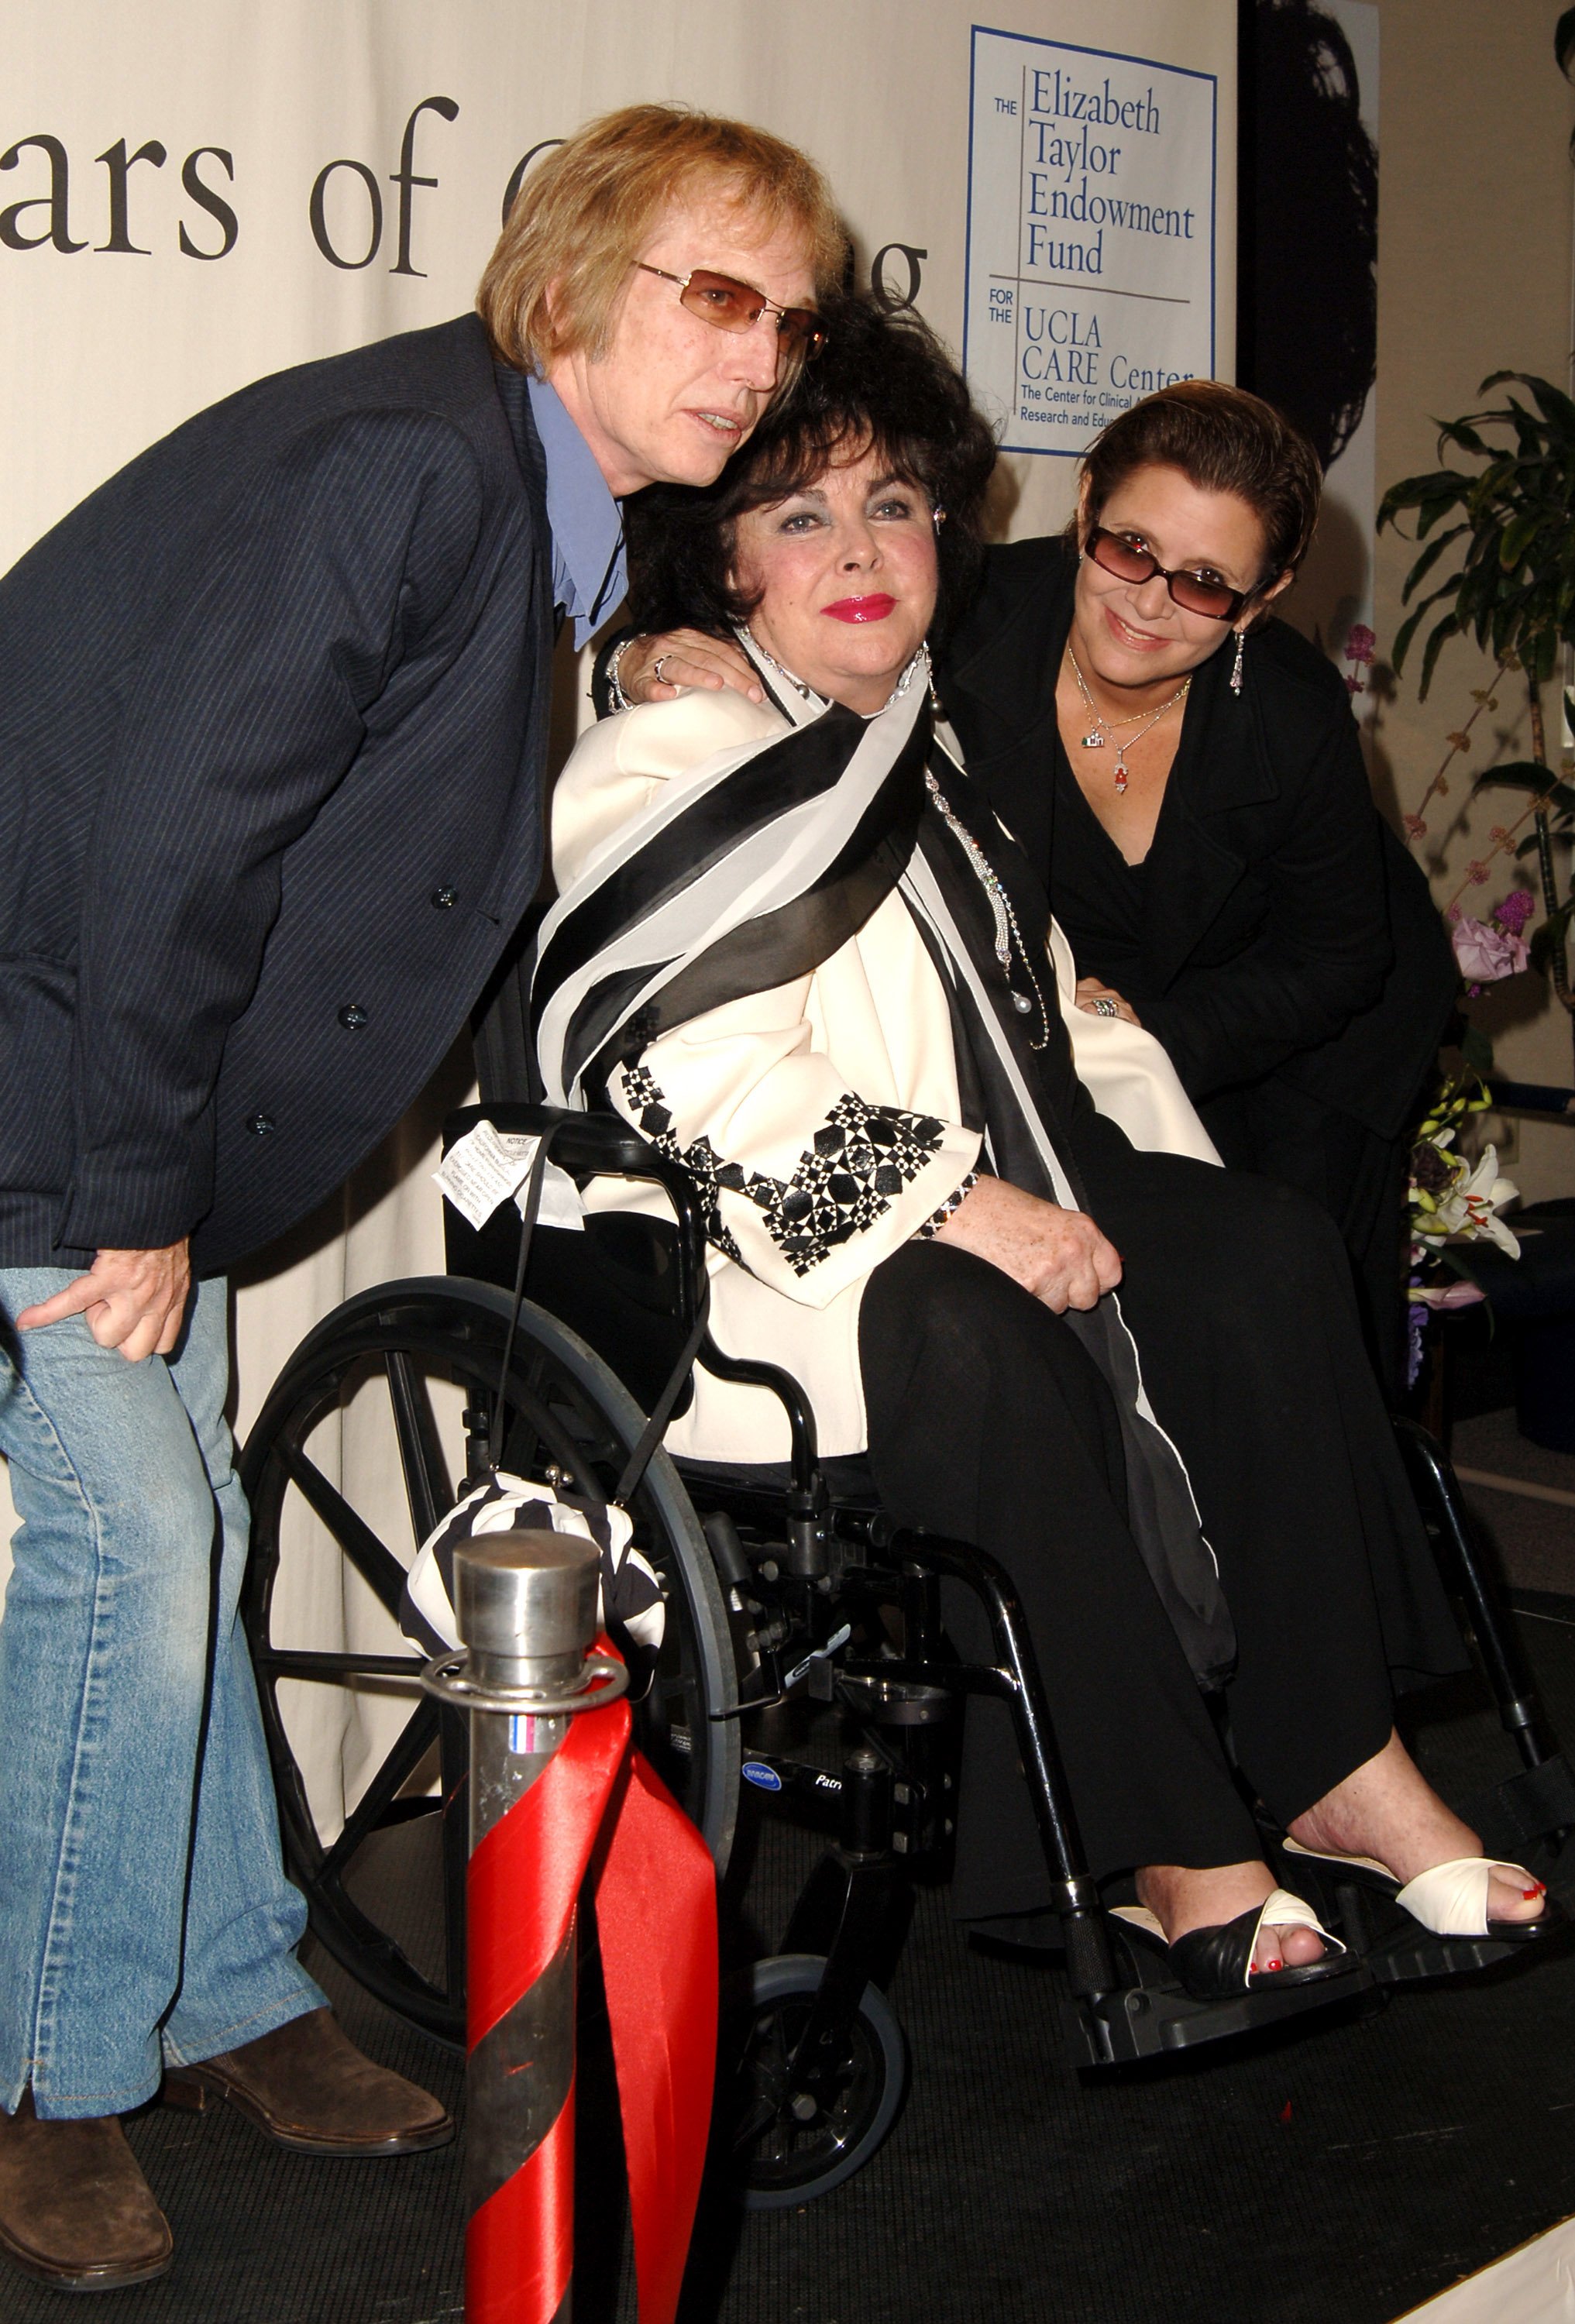 Tom Petty, Elizabeth Taylor and Carrie Fisher during UCLA Names Elizabeth Taylor Endowment Fund for Long Time AIDS Advocate Taylor and Friends Set to Cut Ribbon for New Center at UCLA Clinical Aids Research and Education CARE Center in Los Angeles, California, United States.